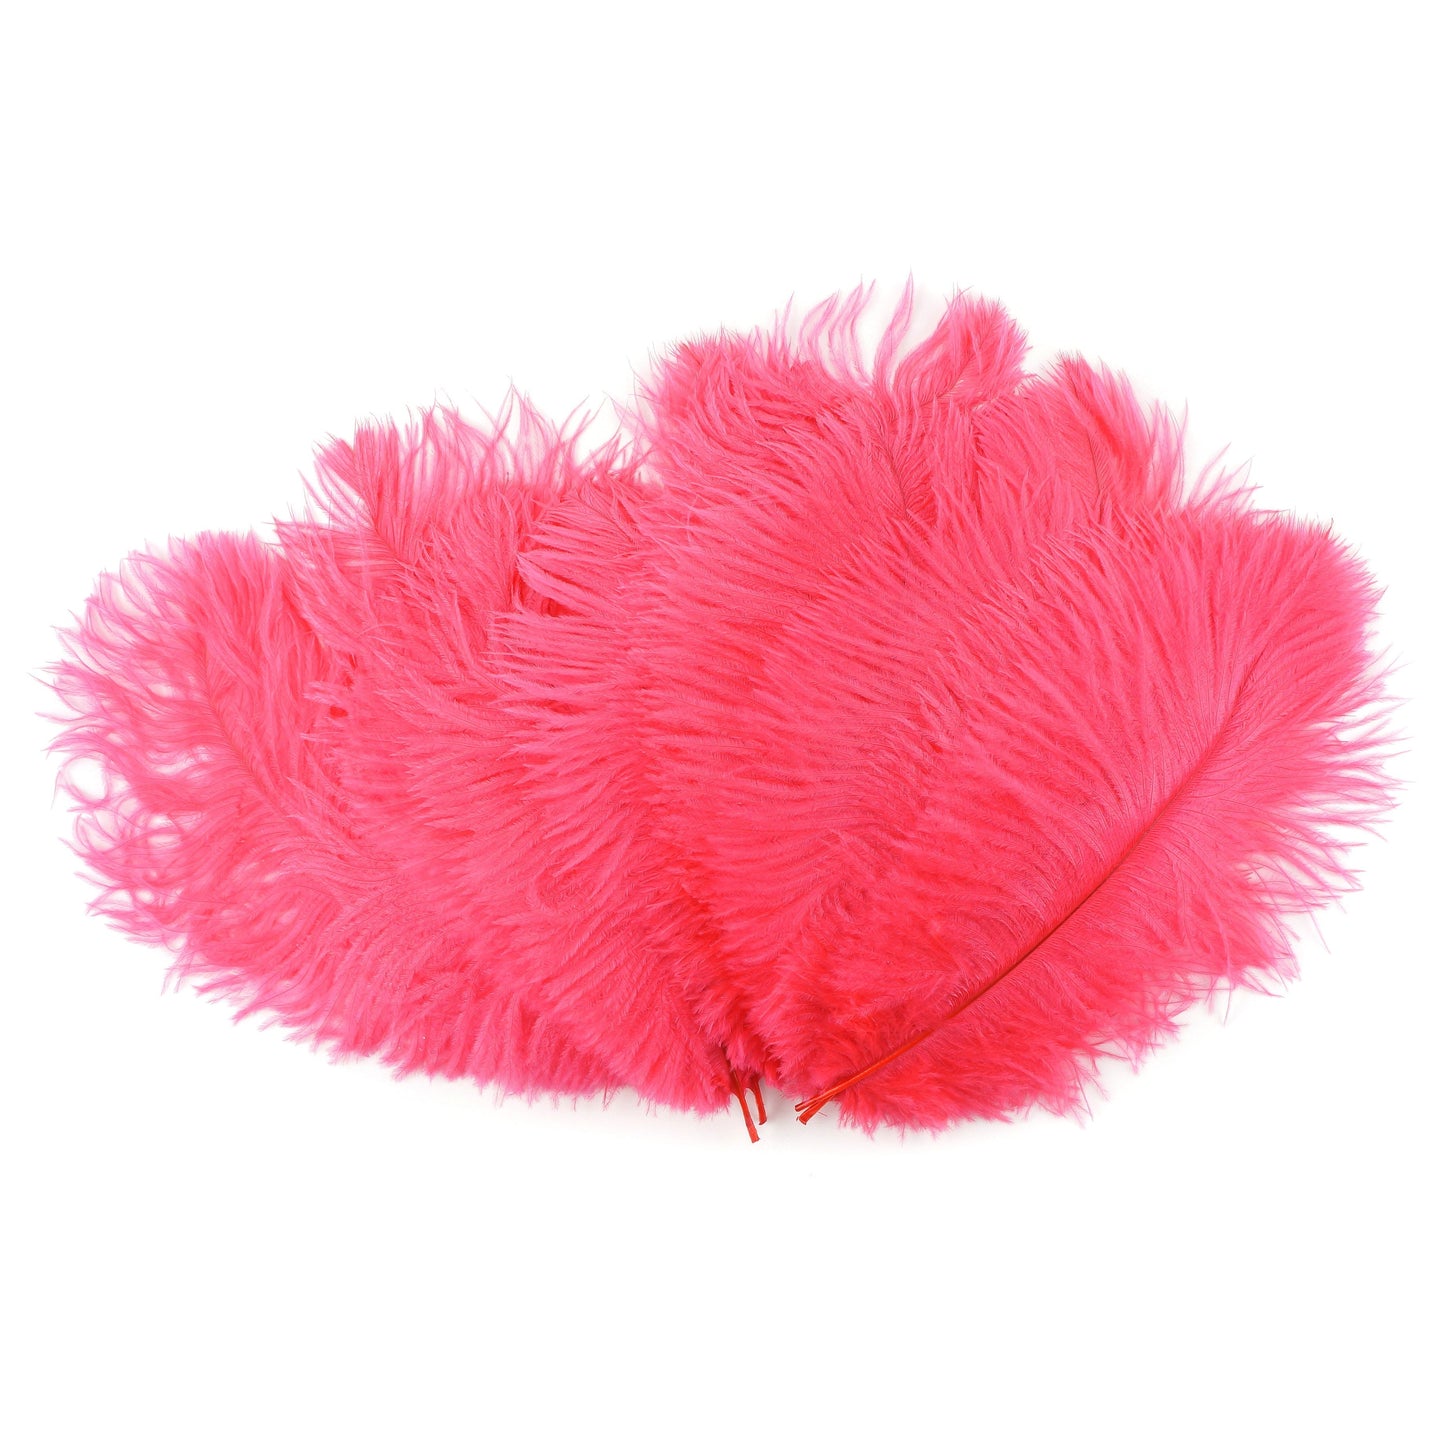 Ostrich Feathers 9-12" Drabs - Pink Orient